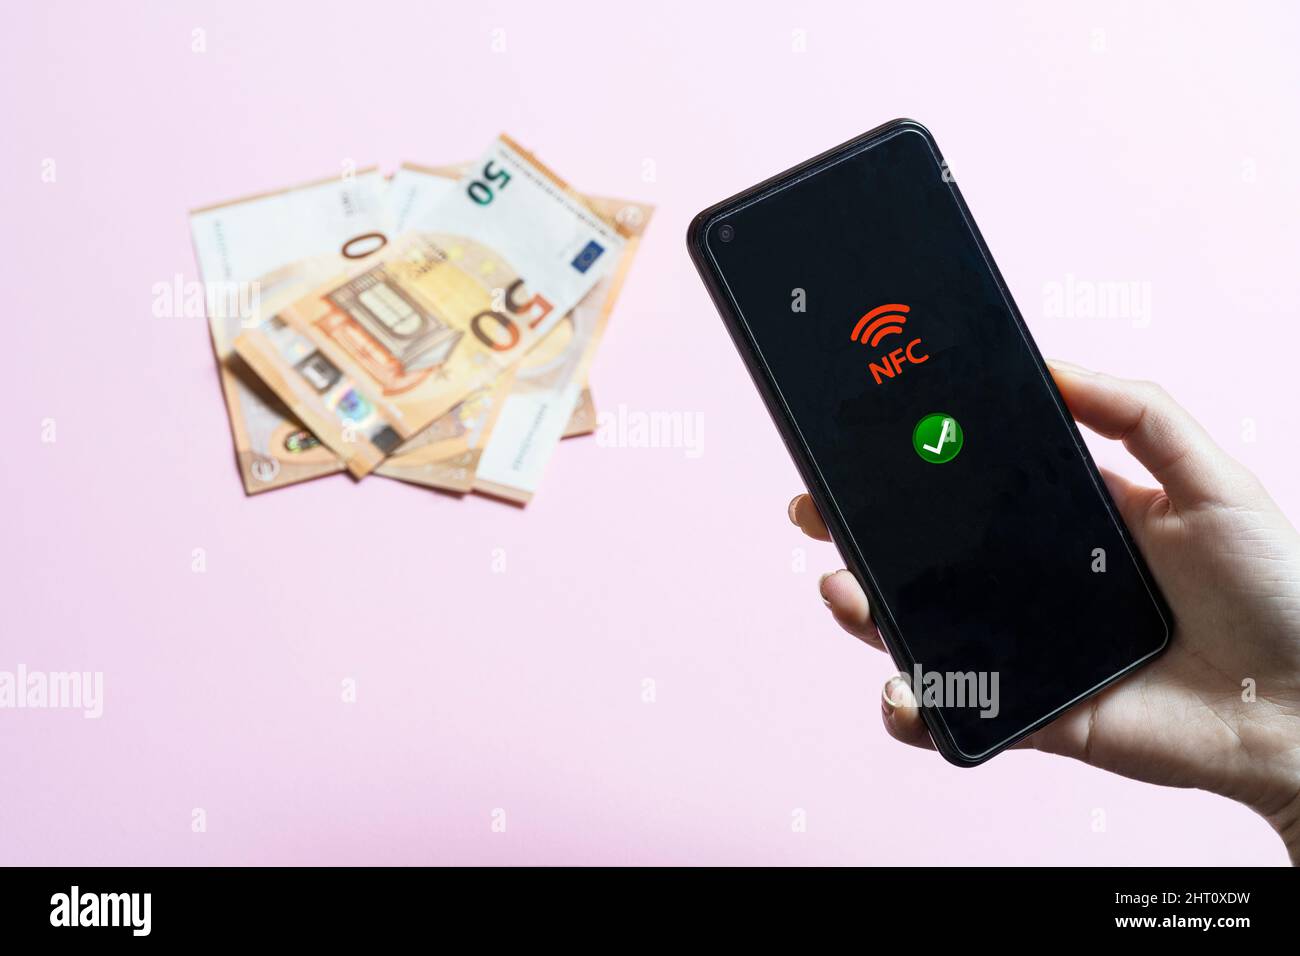 the girl is holding a cellphone in her hand with the NFC icon on the screen and with some euro banknotes in the background Stock Photo